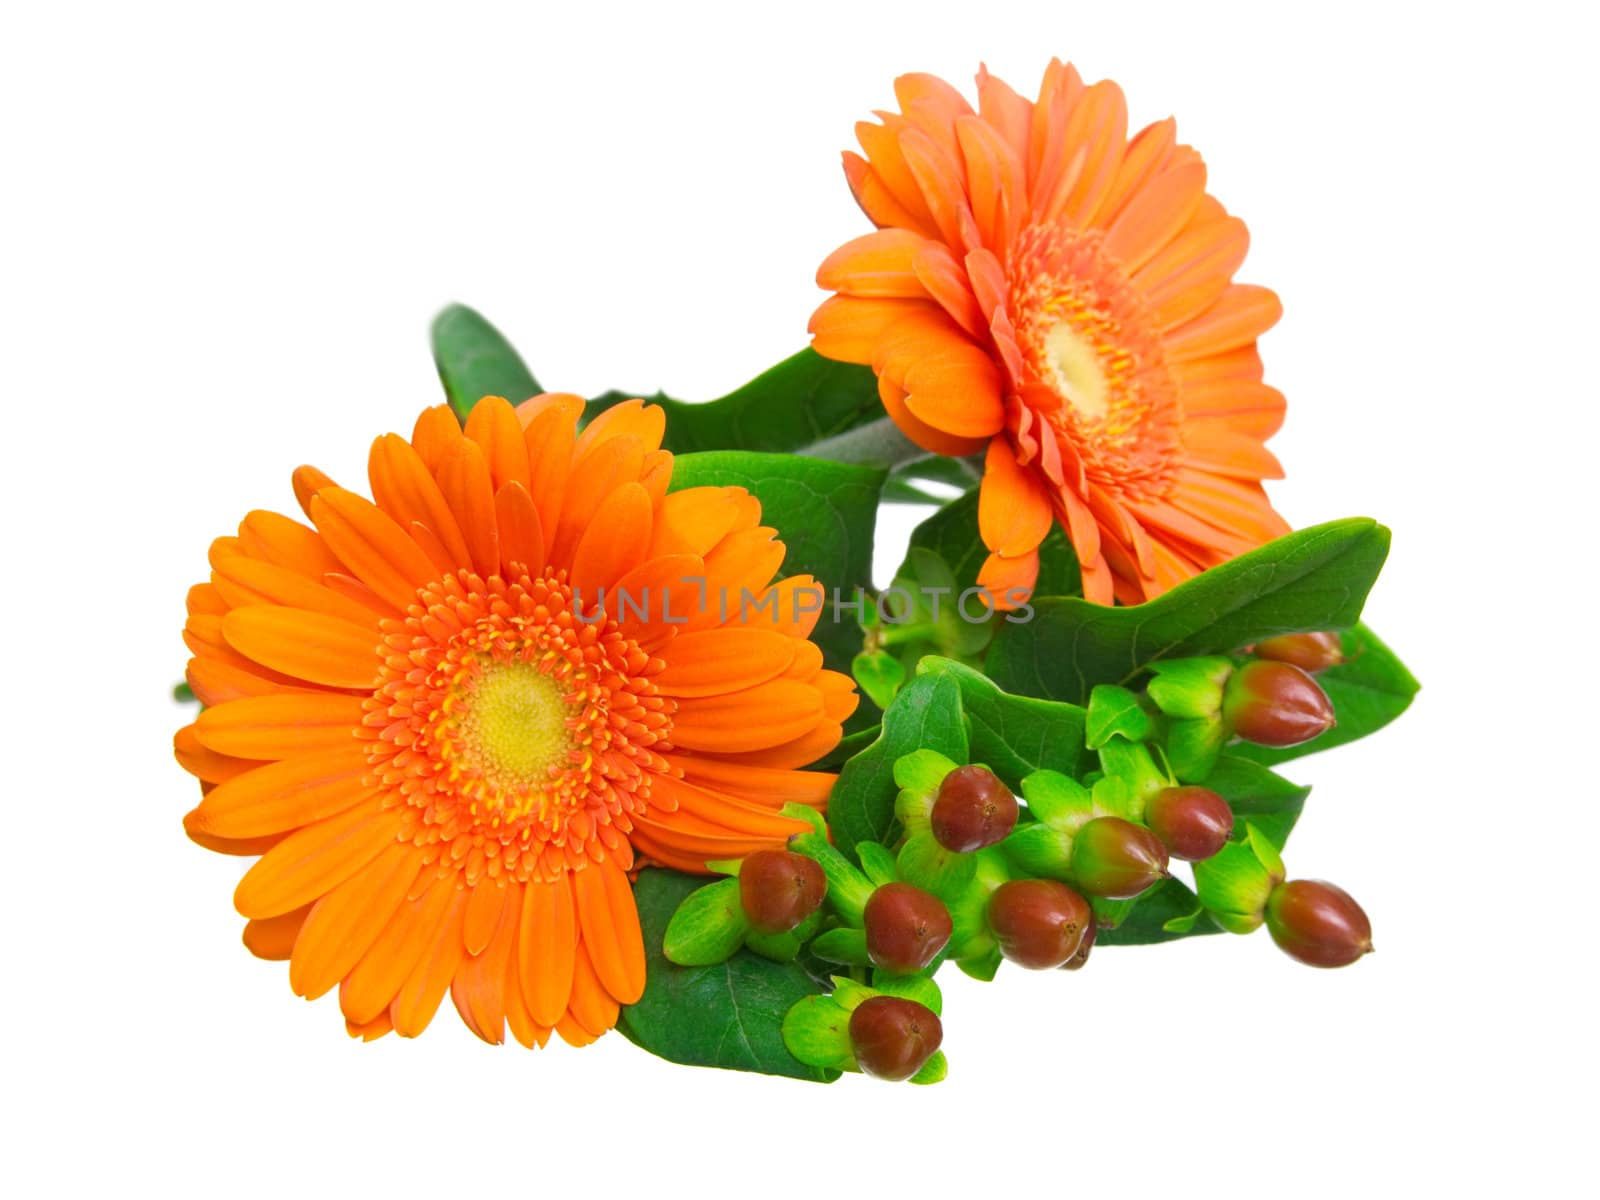 two gerber daisy isolated on white background 